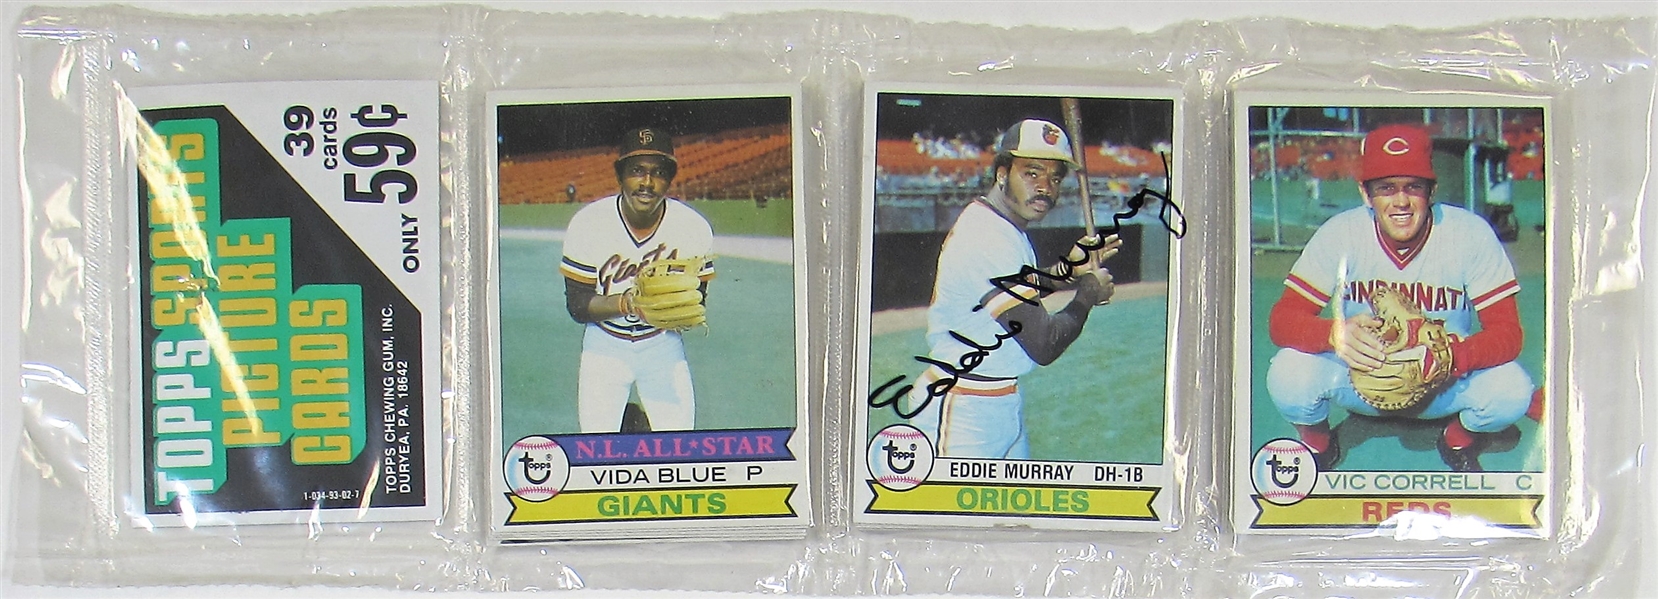 1979 Topps Rack Pack - Eddie Murray Autographed Outside